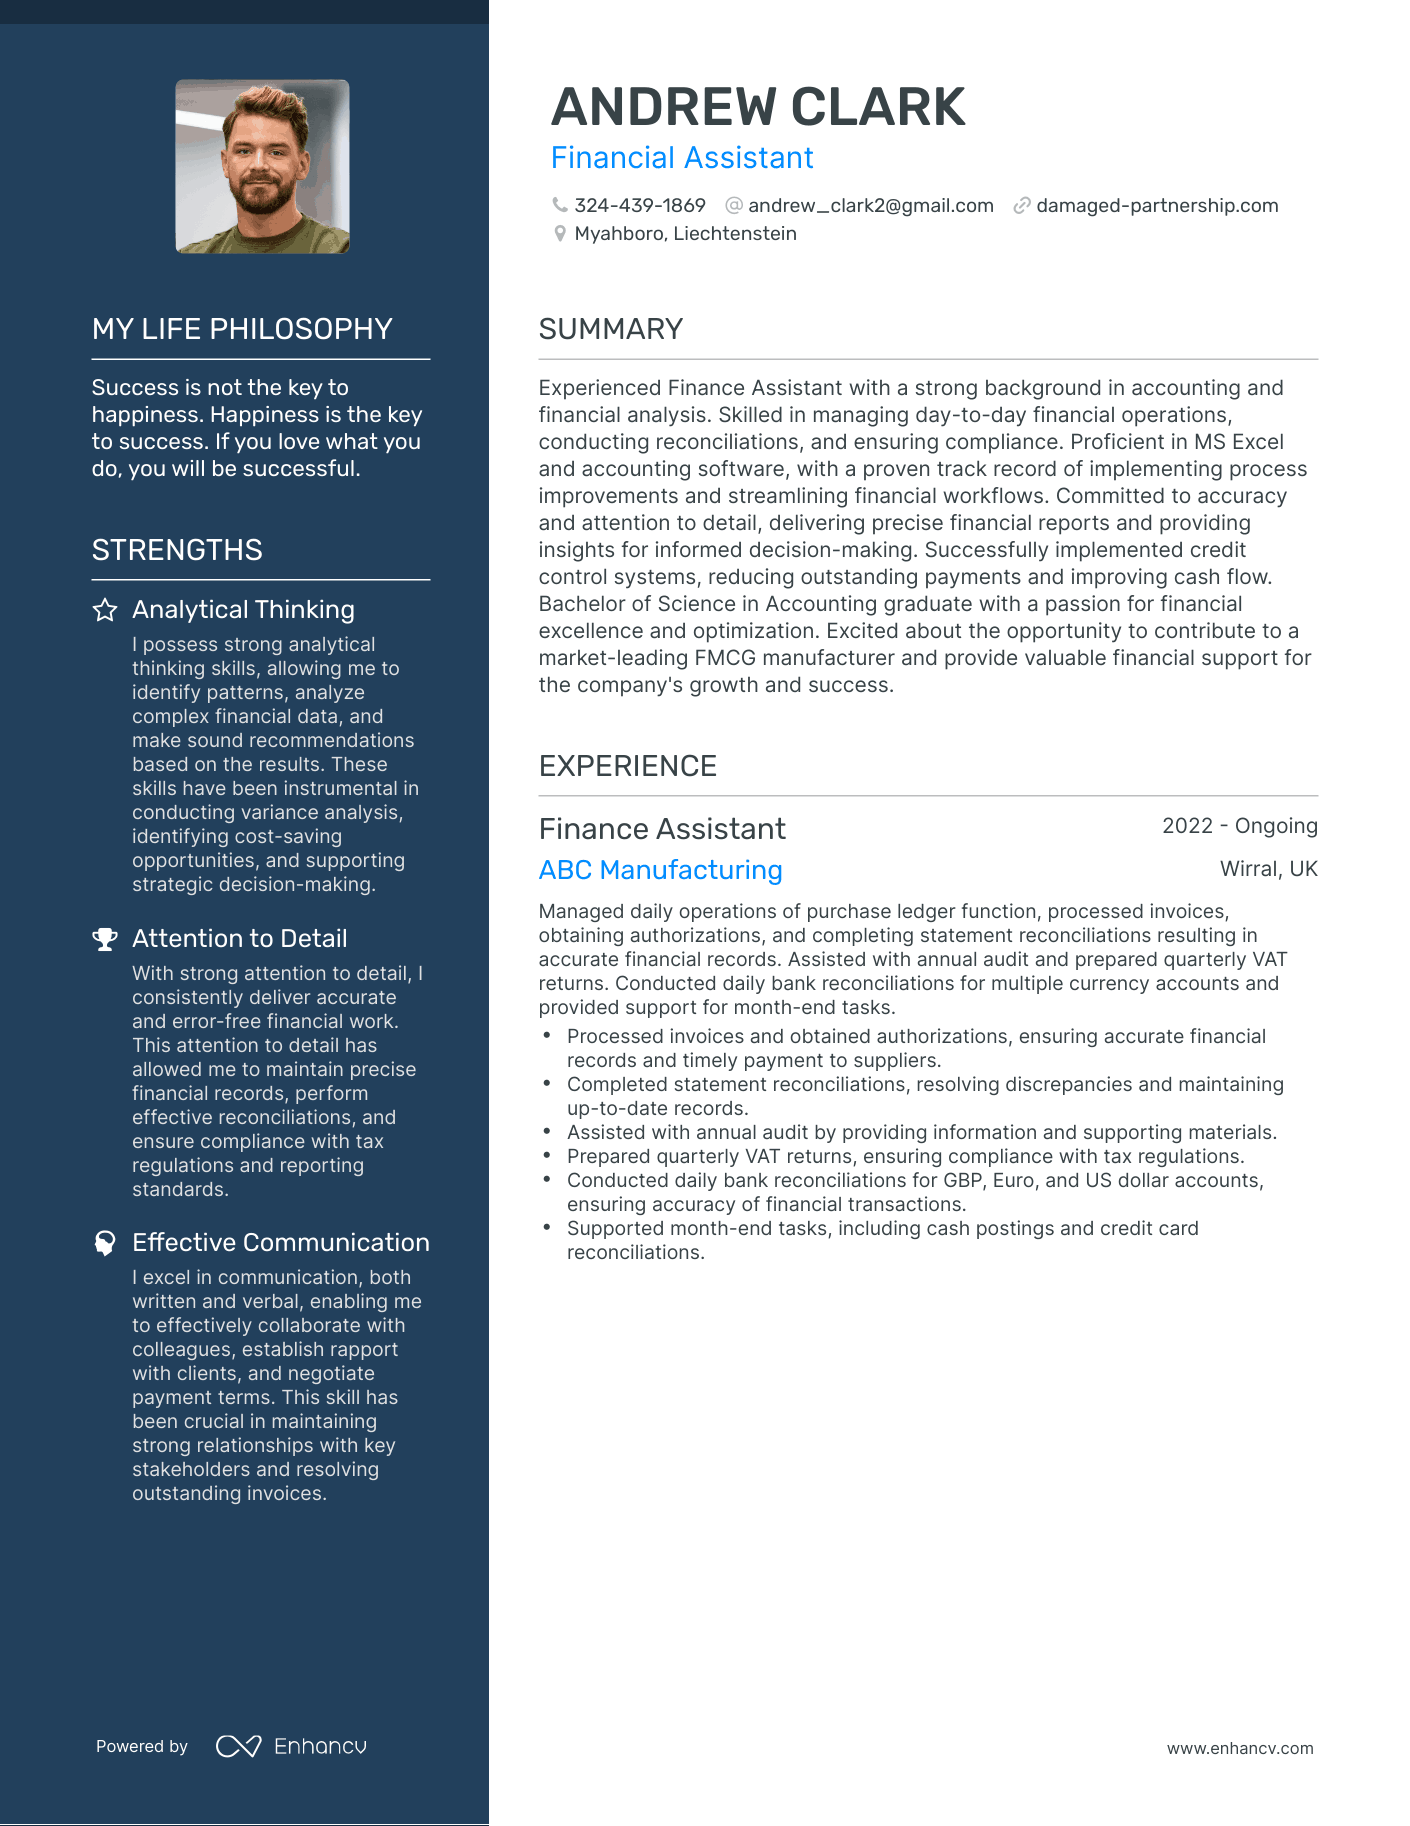 Financial Assistant resume example